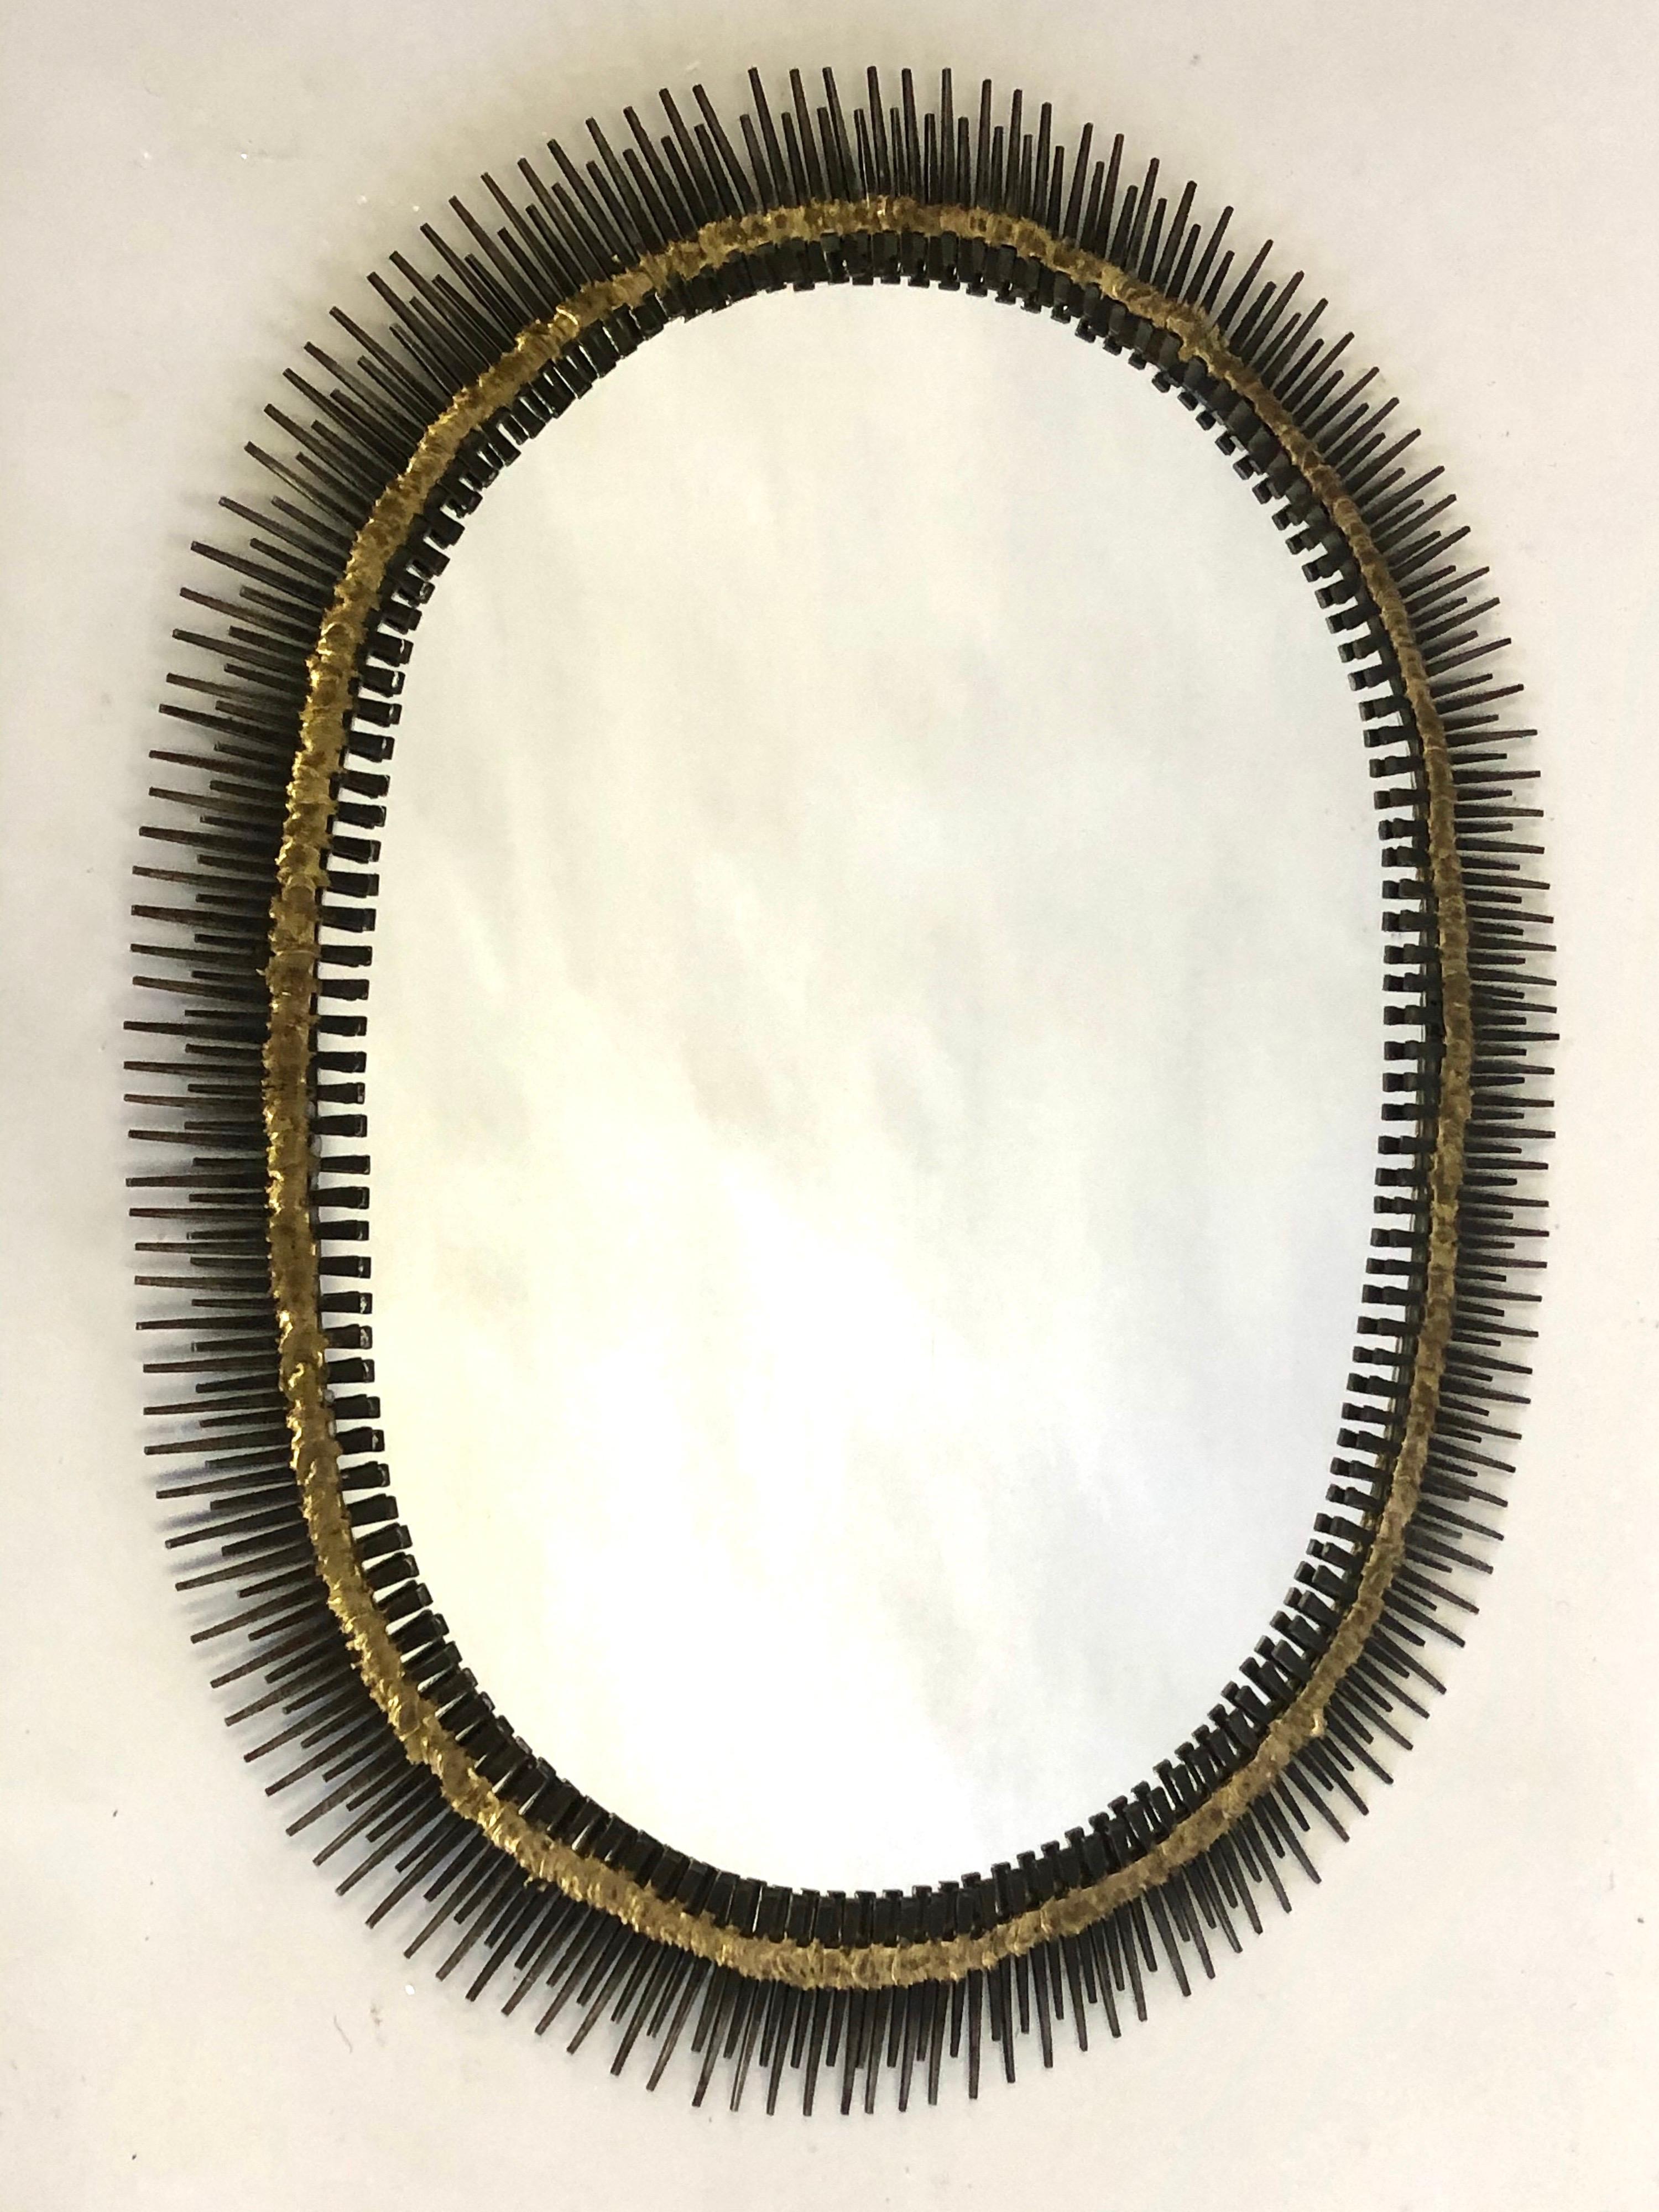 Elegant Handmade Mid-Century Modern Craftsman wall mirror or wall mounted sculpture in an oval sunburst form by the French Canadian artist, Bela. The piece has a striking and refreshing quality with it's oval form and dynamic materials and its hand